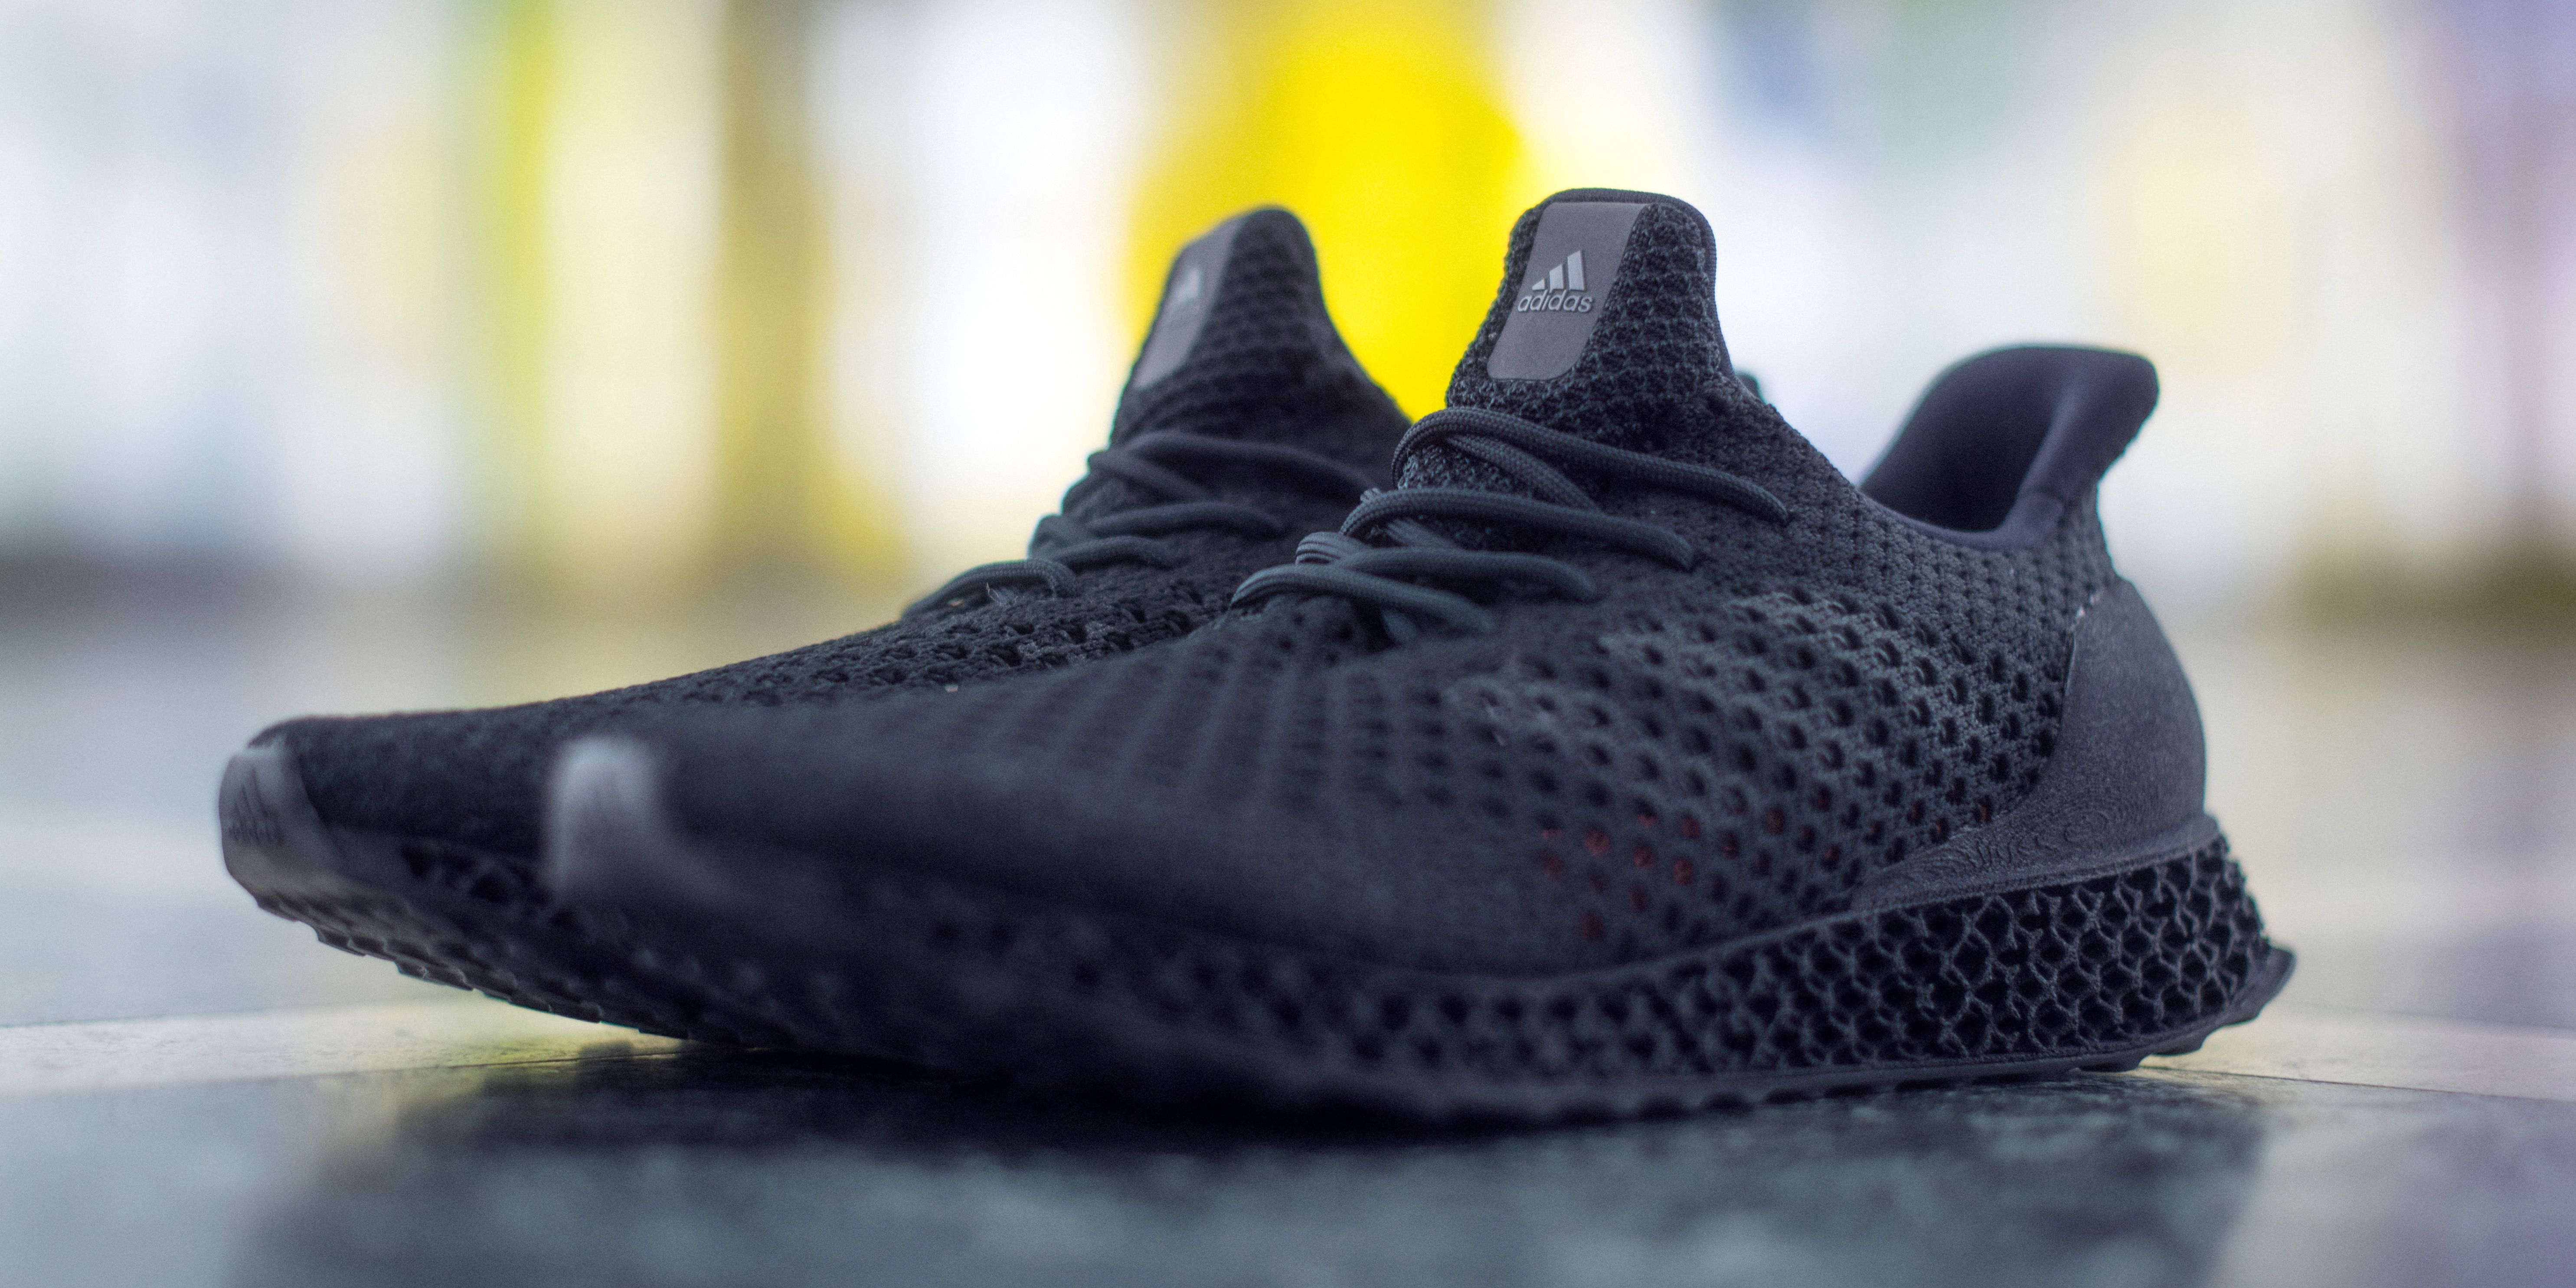 Where to Buy Adidas' New 3D Runner - Adidas Is Releasing a Sneaker